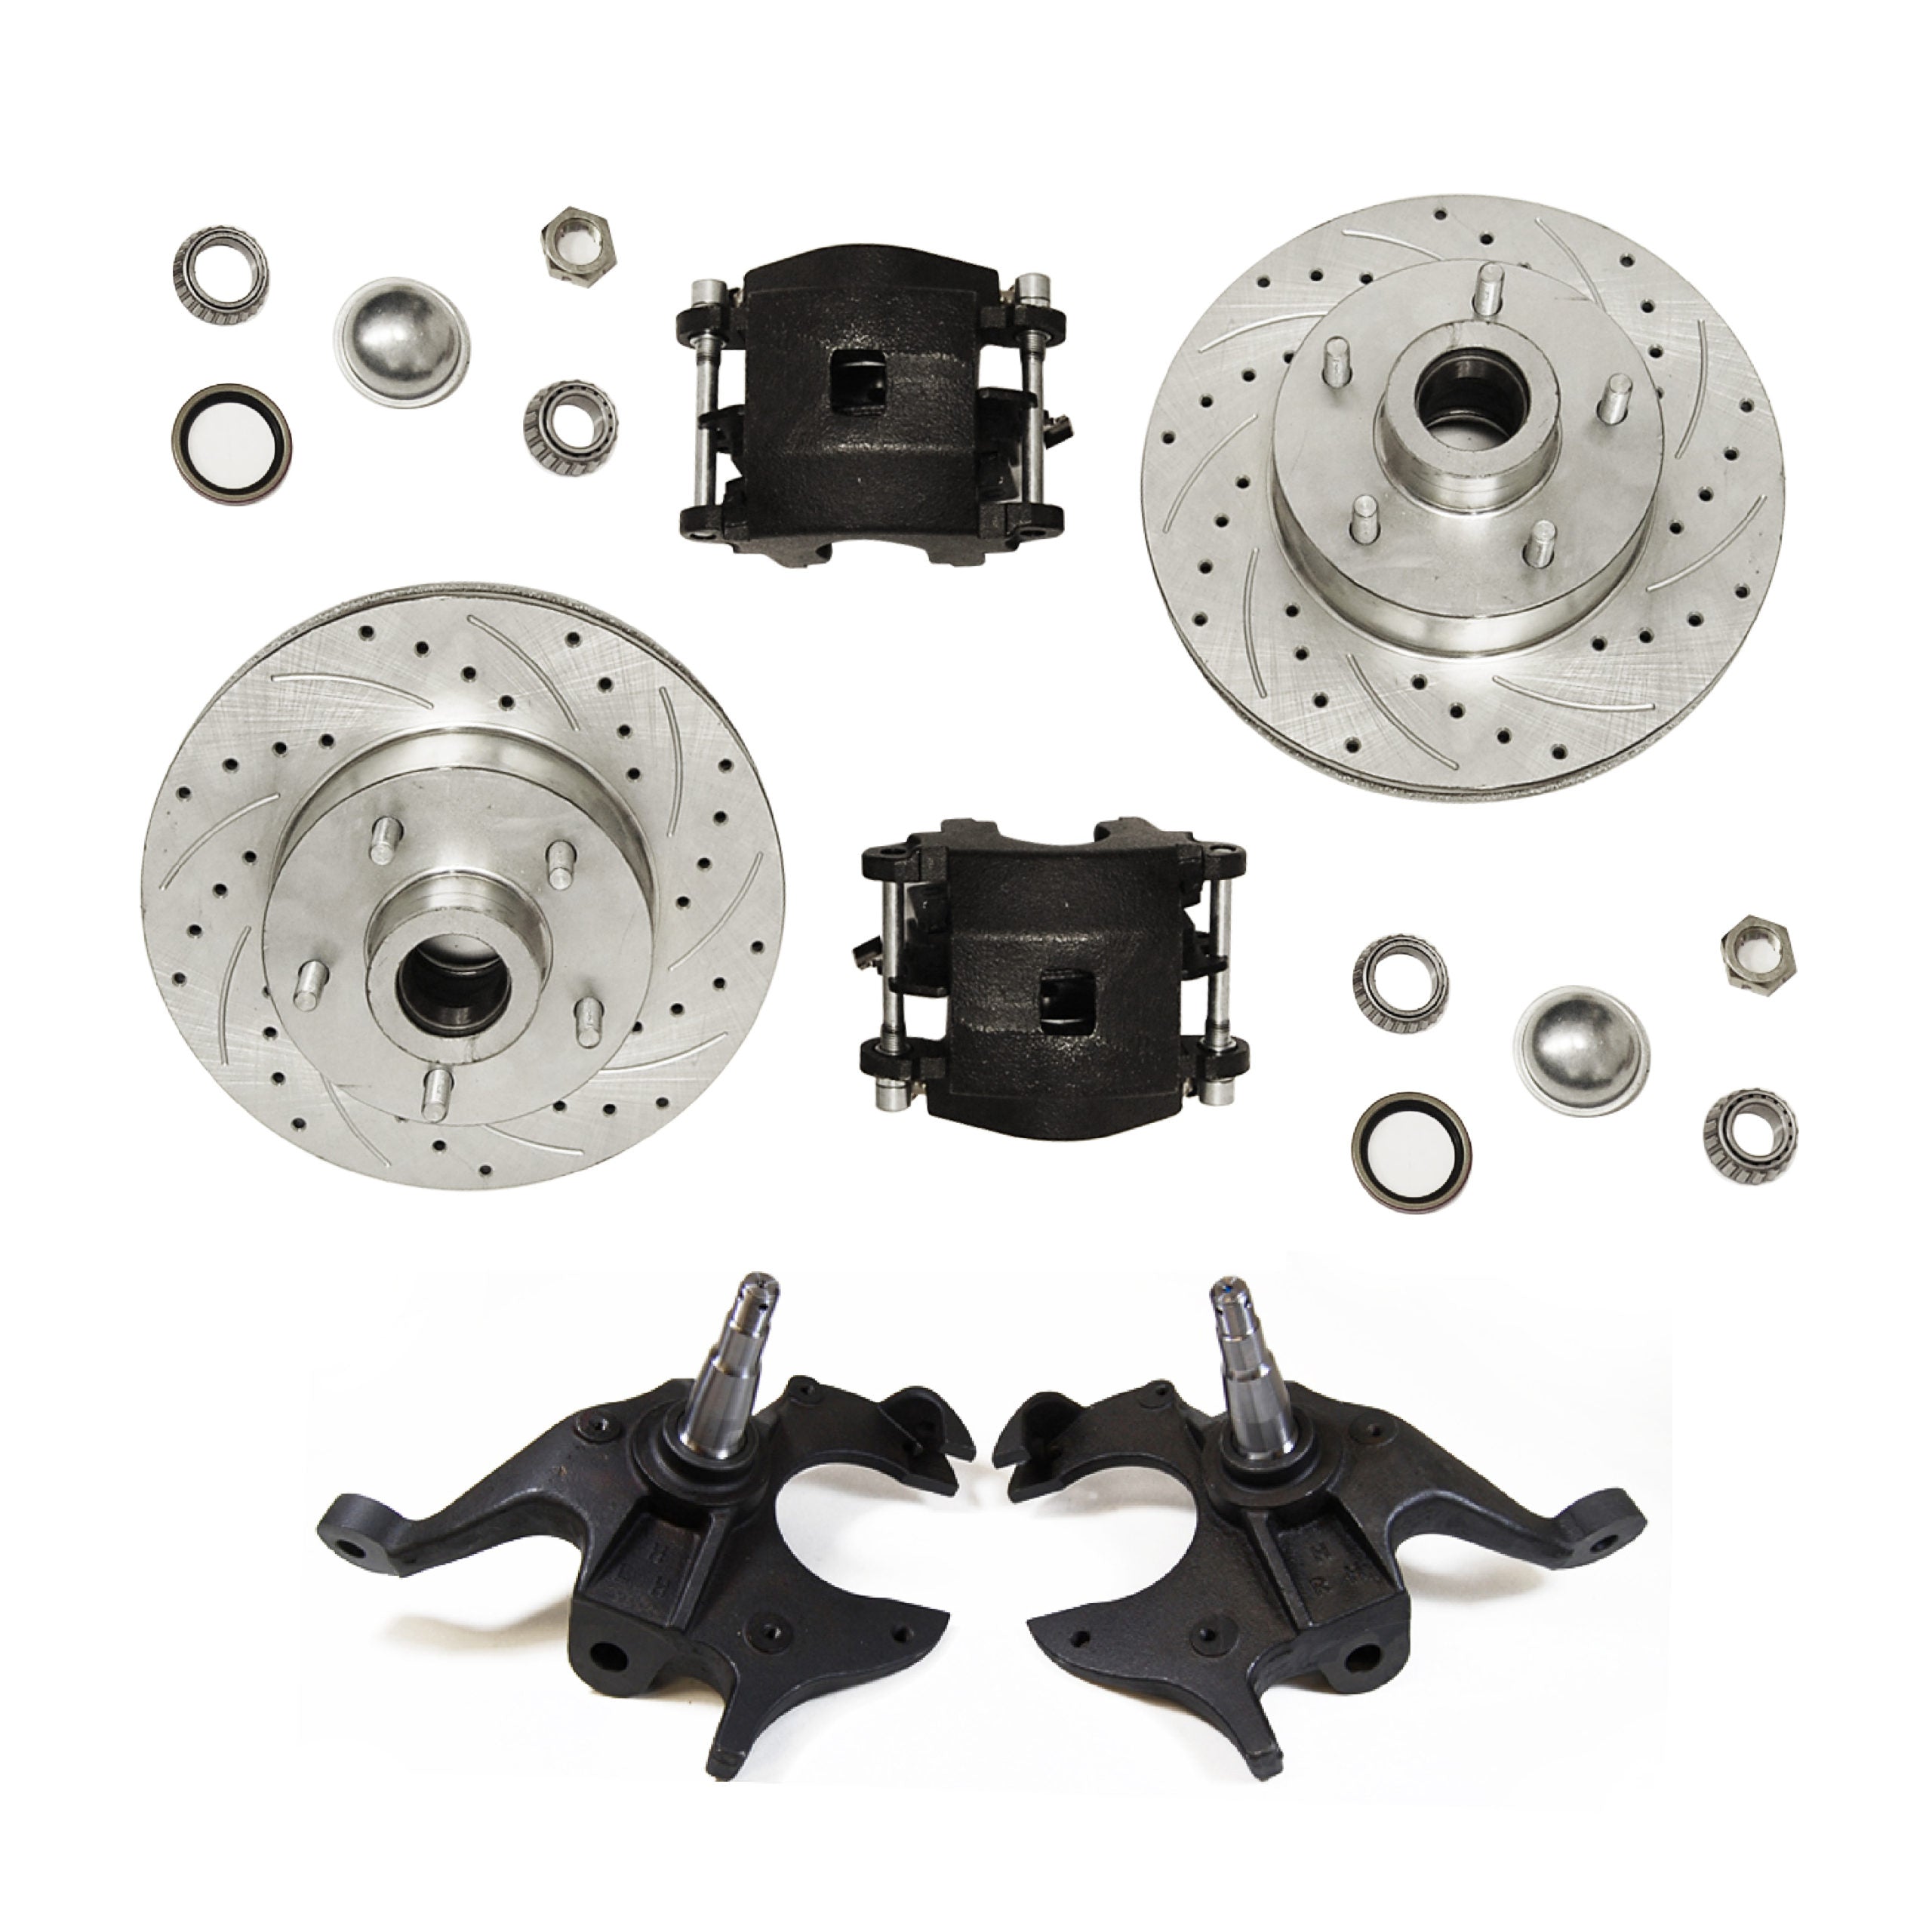 Racing Power Company R1701-2KIT Gm a-body front disc rotor kit